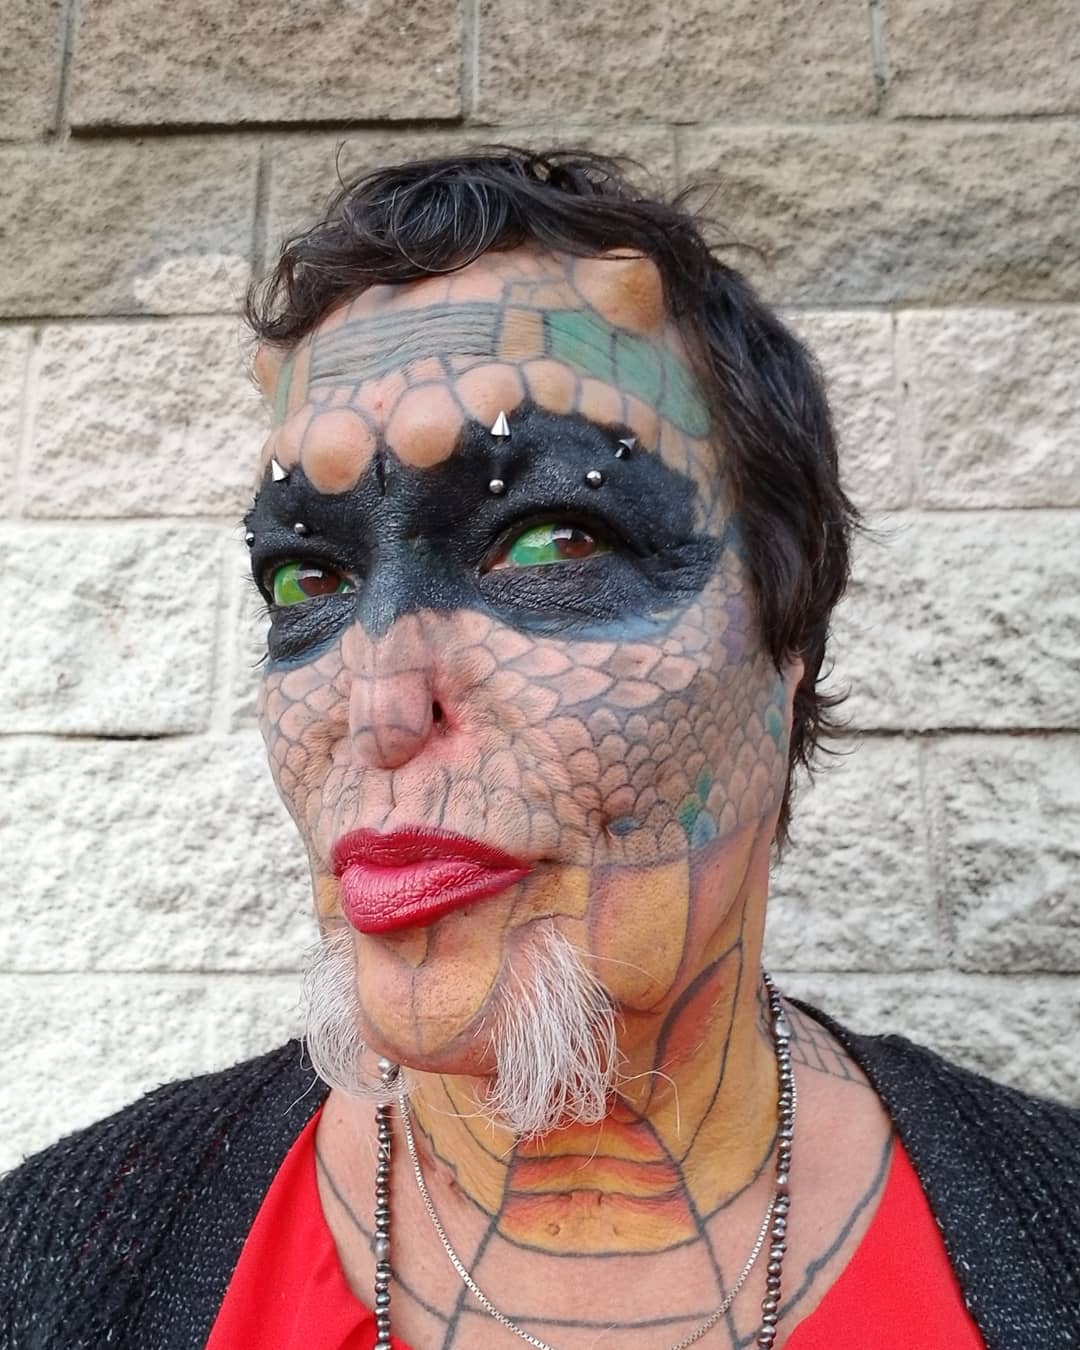 Person Who Spent £61,000 On Becoming 'Human Dragon' Reveals What They Used To Look Like